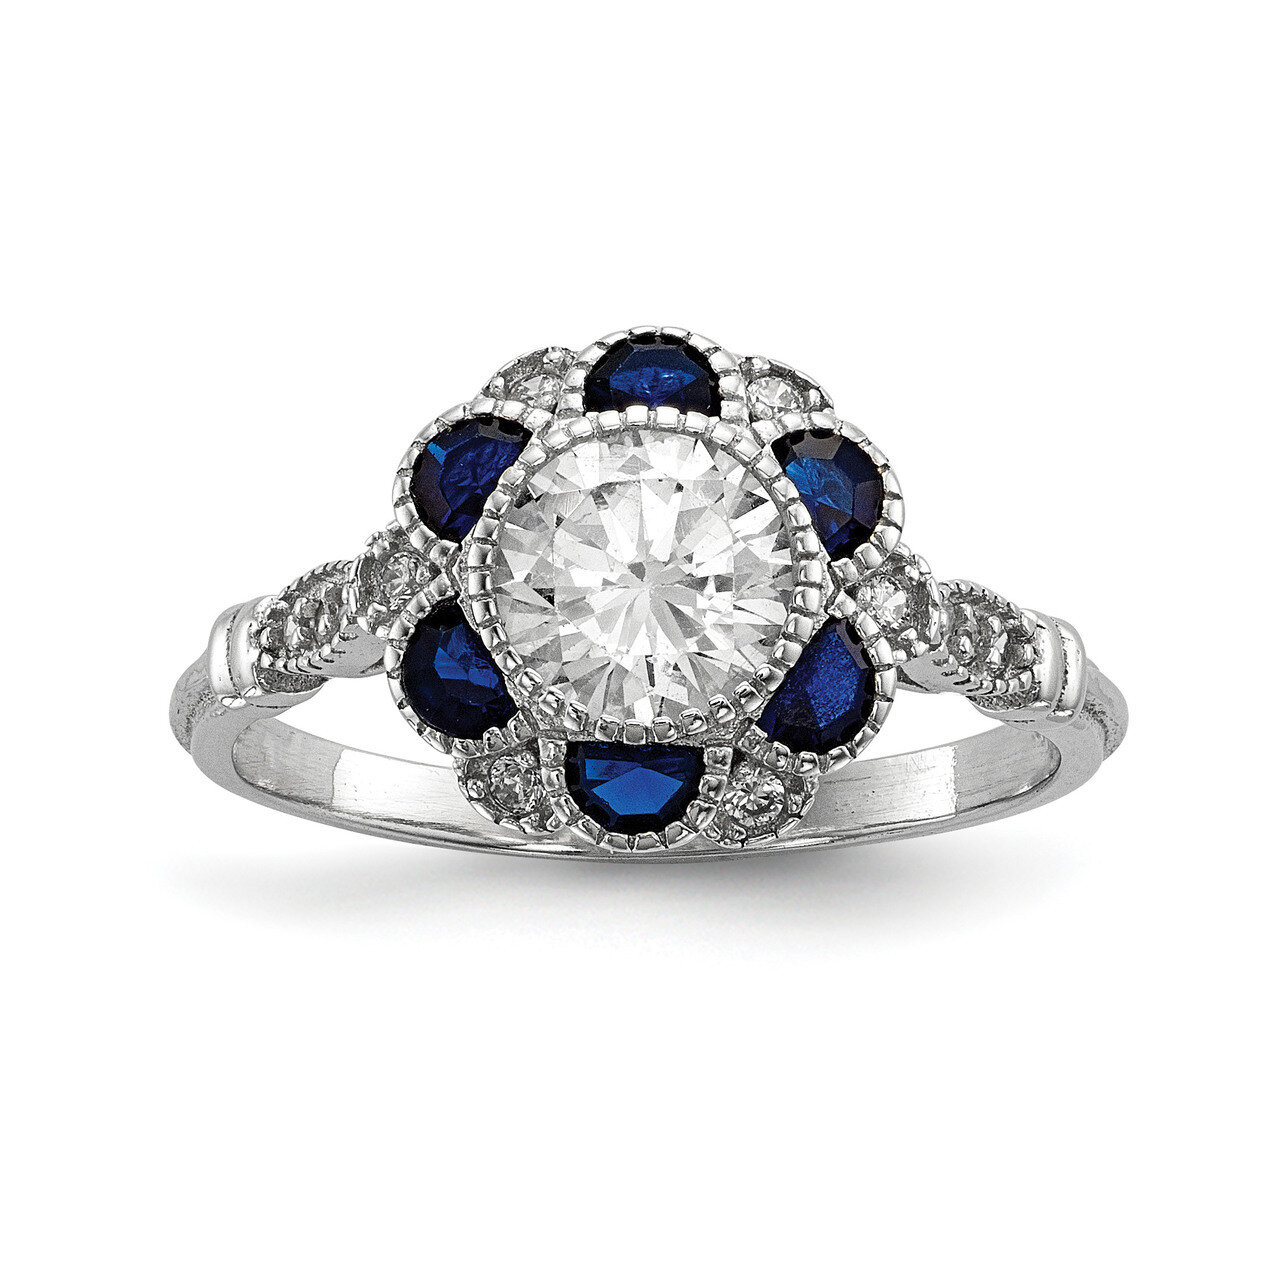 CZ Diamond & Synthetic Blue Sapphire Flower Ring Sterling Silver Rhodium-plated QR6770